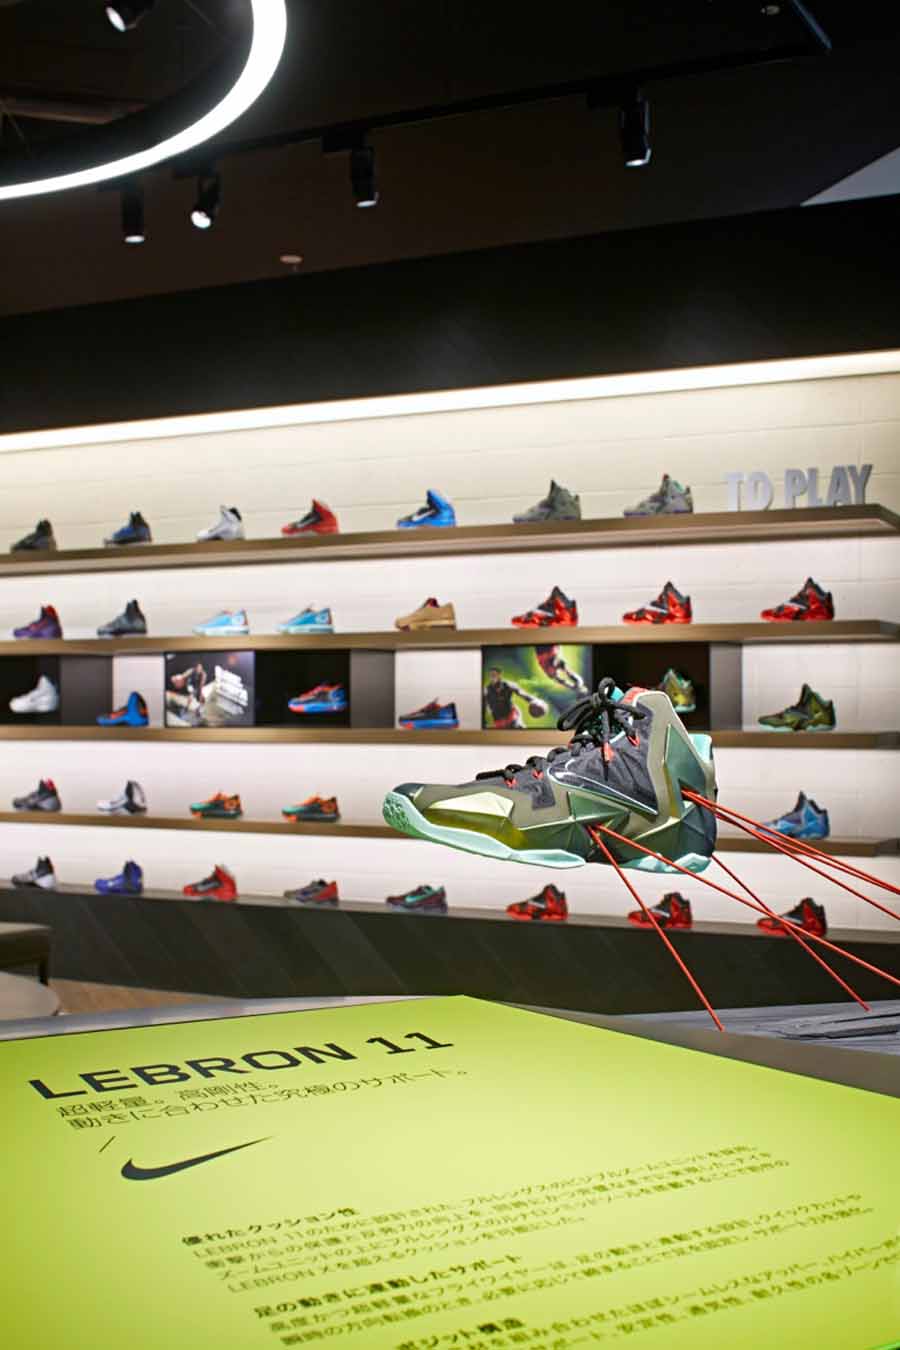 One of the Best Nike Basketball and Jordan Retail Spots is in 